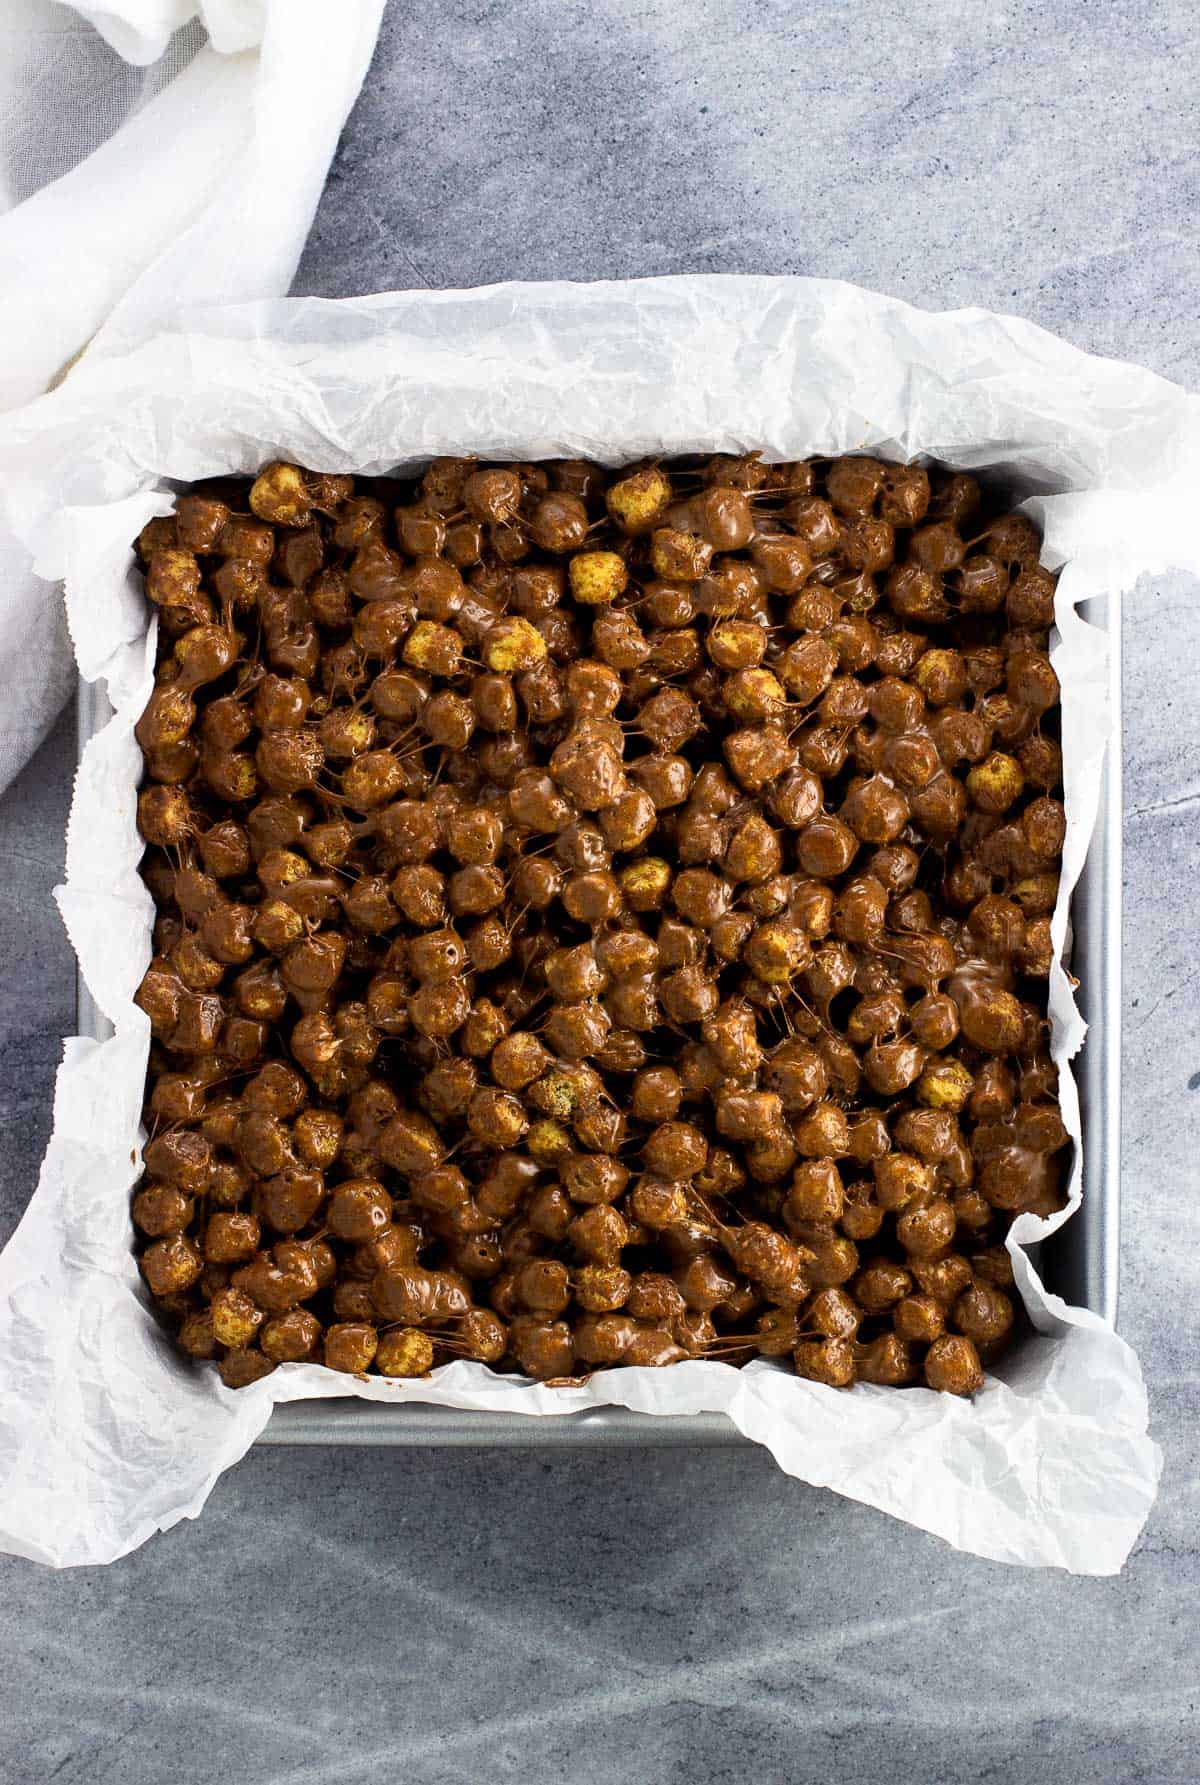 Chocolate Peanut Butter Cap'n Crunch Treats pressed into a parchment-lined square pan.